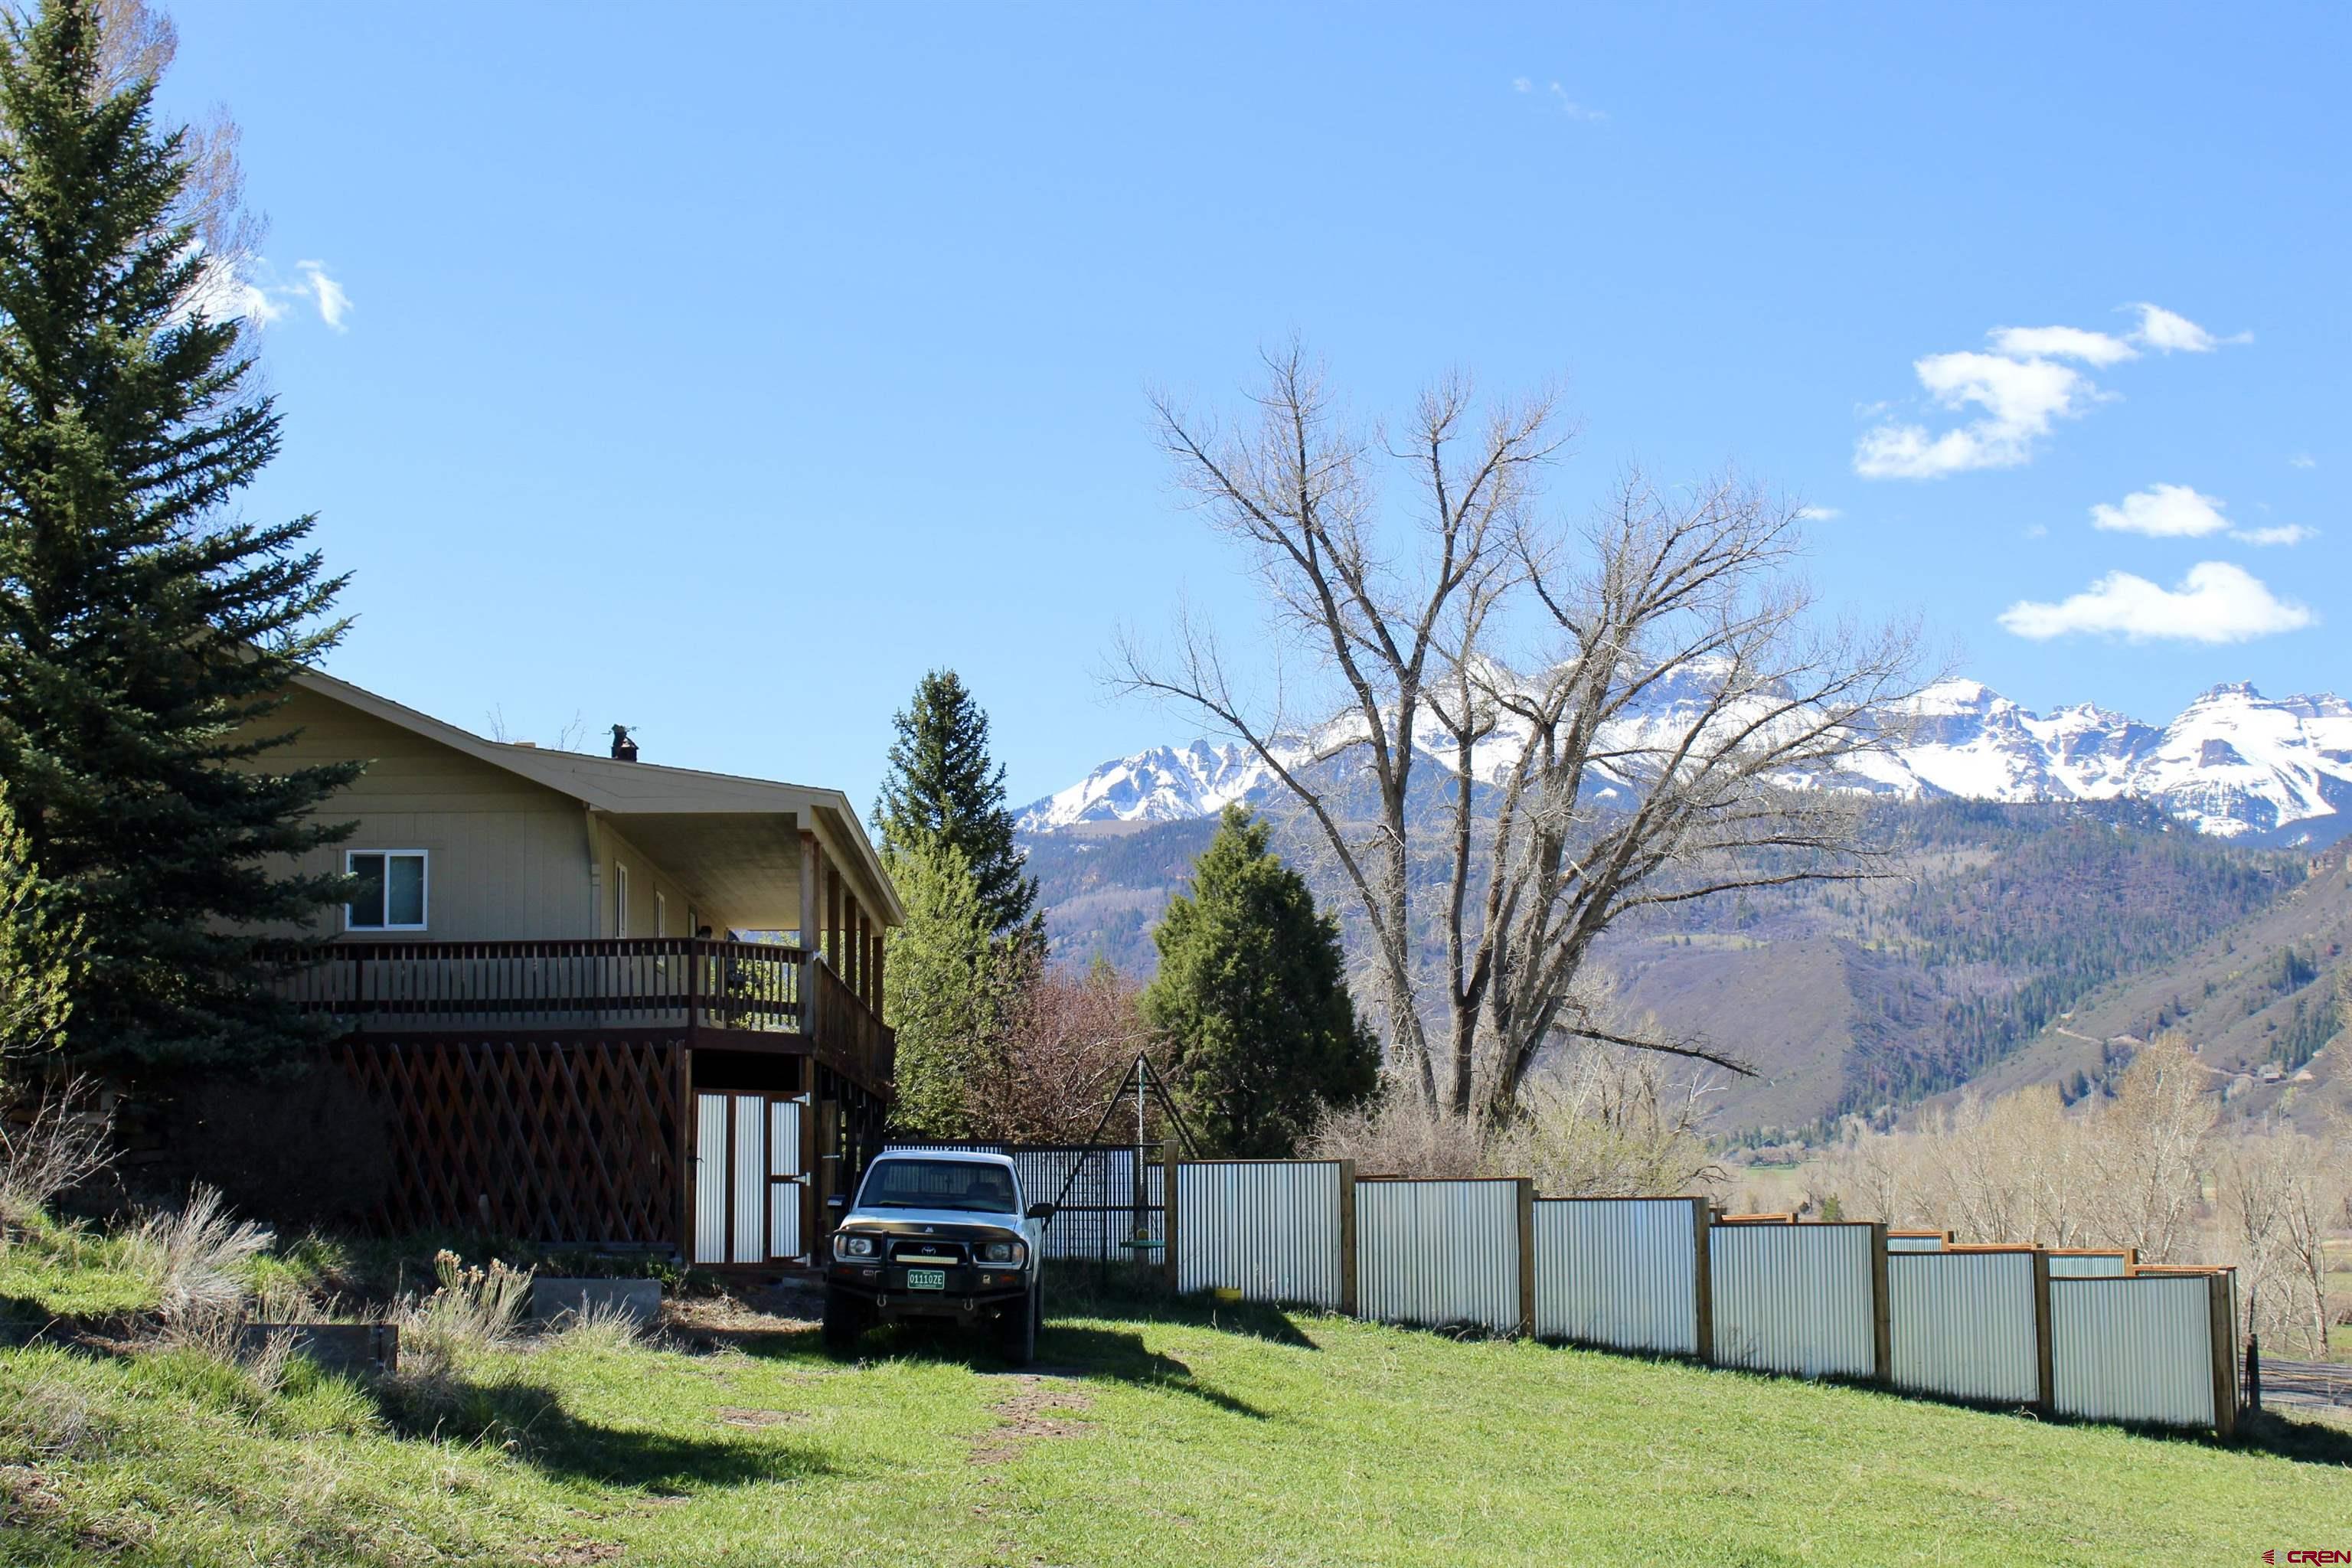 LOCATION! LOCATION! LOCATION! MOUNTAIN VIEWS AT THEIR BEST!  Here is your chance to get a one-of-a-kind property close to Ouray and Ridgway with everything you need.  Located just off 550 and across from Orvis Hot Springs, this 1.85 acres is complete with a 3 bedroom/2 bath home, partially completed basement which already has a heat source, detached 3 bay garages with a shop, and a gorgeous, enclosed gazebo with electricity overlooking the Sneffels range. The gazebo could be used as a reading room, observation area, hot tub room, art room or more. The basement can be a 4th bedroom, office, work out area, or anything you dream up. There is also a privacy fenced backyard for your 4-legged friends, children to play, or to enjoy yourself.  With the home sitting up above the highway, the deck has spectacular views of the mountains.  The property has 2 access points and has room for all your toys and a roomy shop for your projects.   Come see all the possibilities.  Empty and easy to show! The sellers are offering a $10,000 seller's concession.